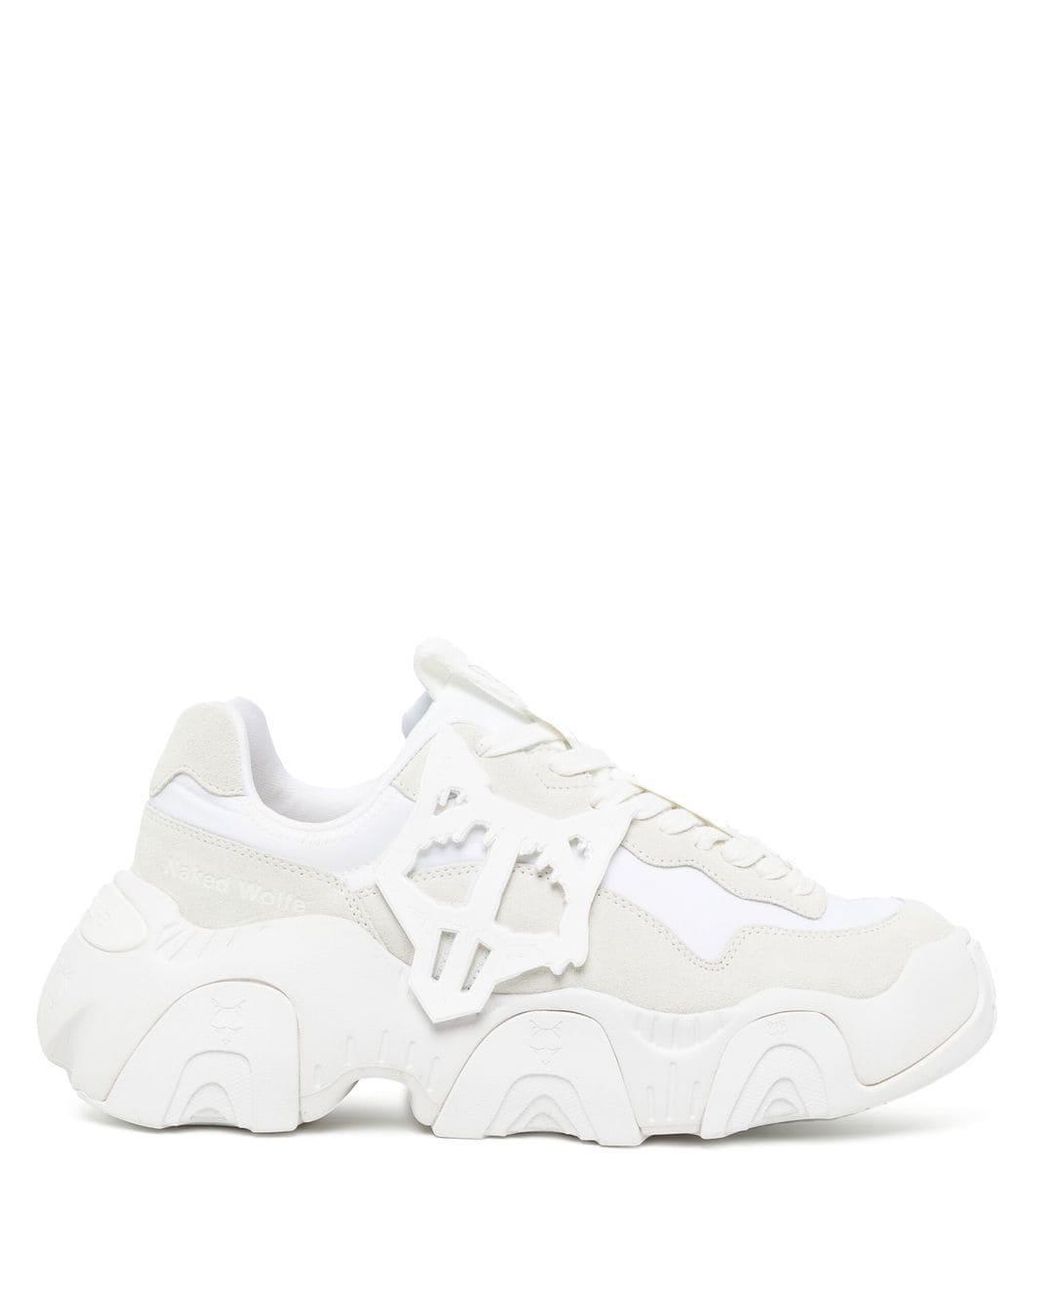 Naked Wolfe Trigger Triple Sneakers in White | Lyst Canada